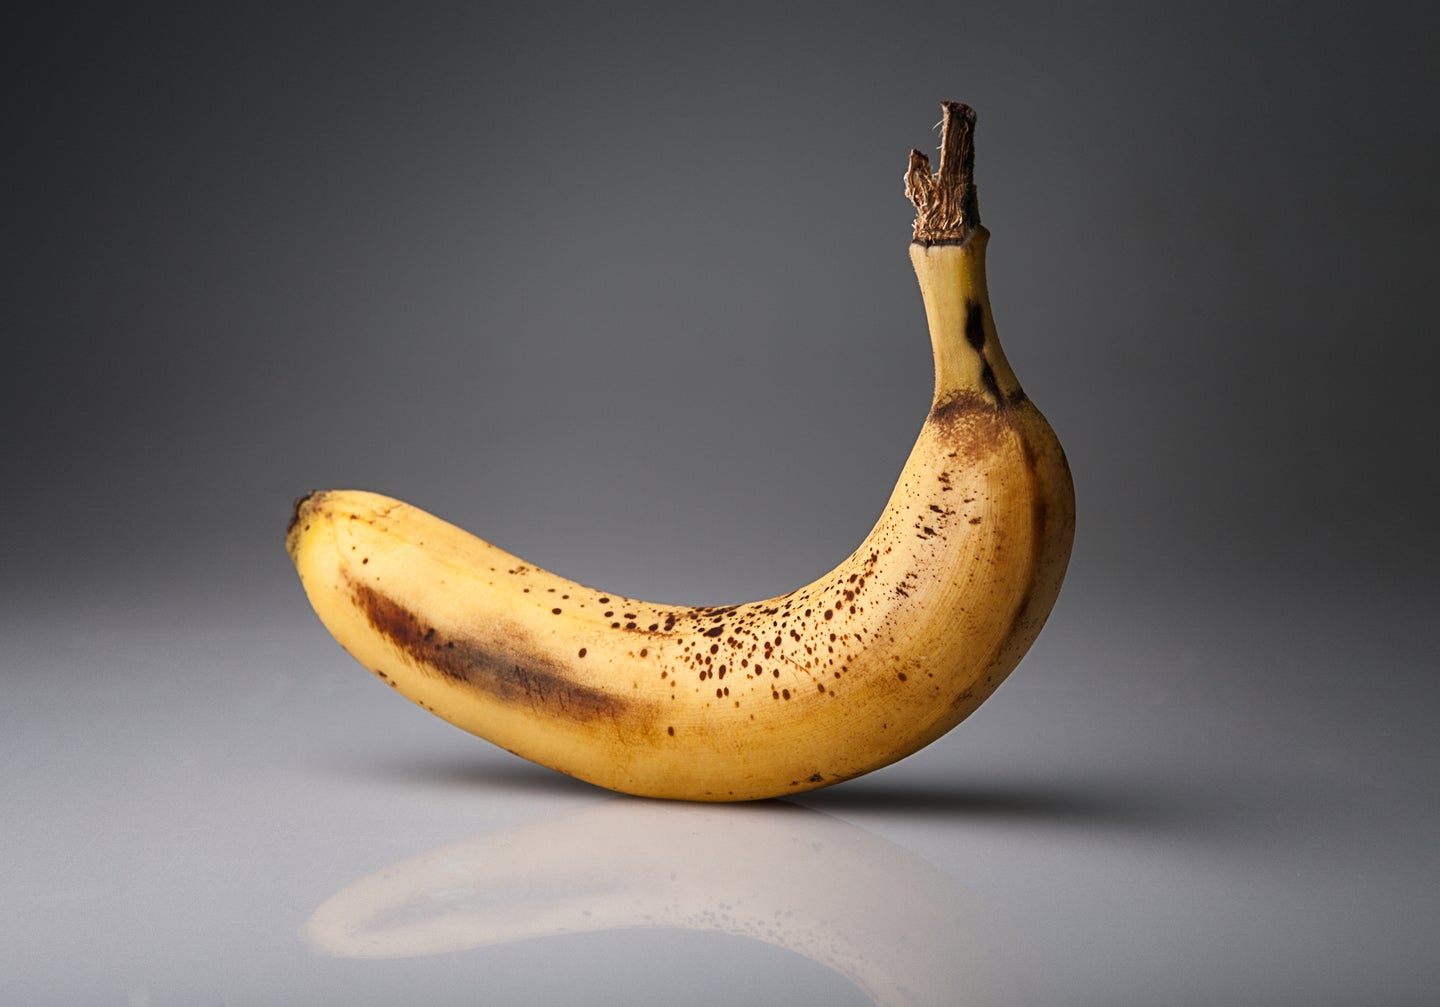 withered old banana. concept of old age.